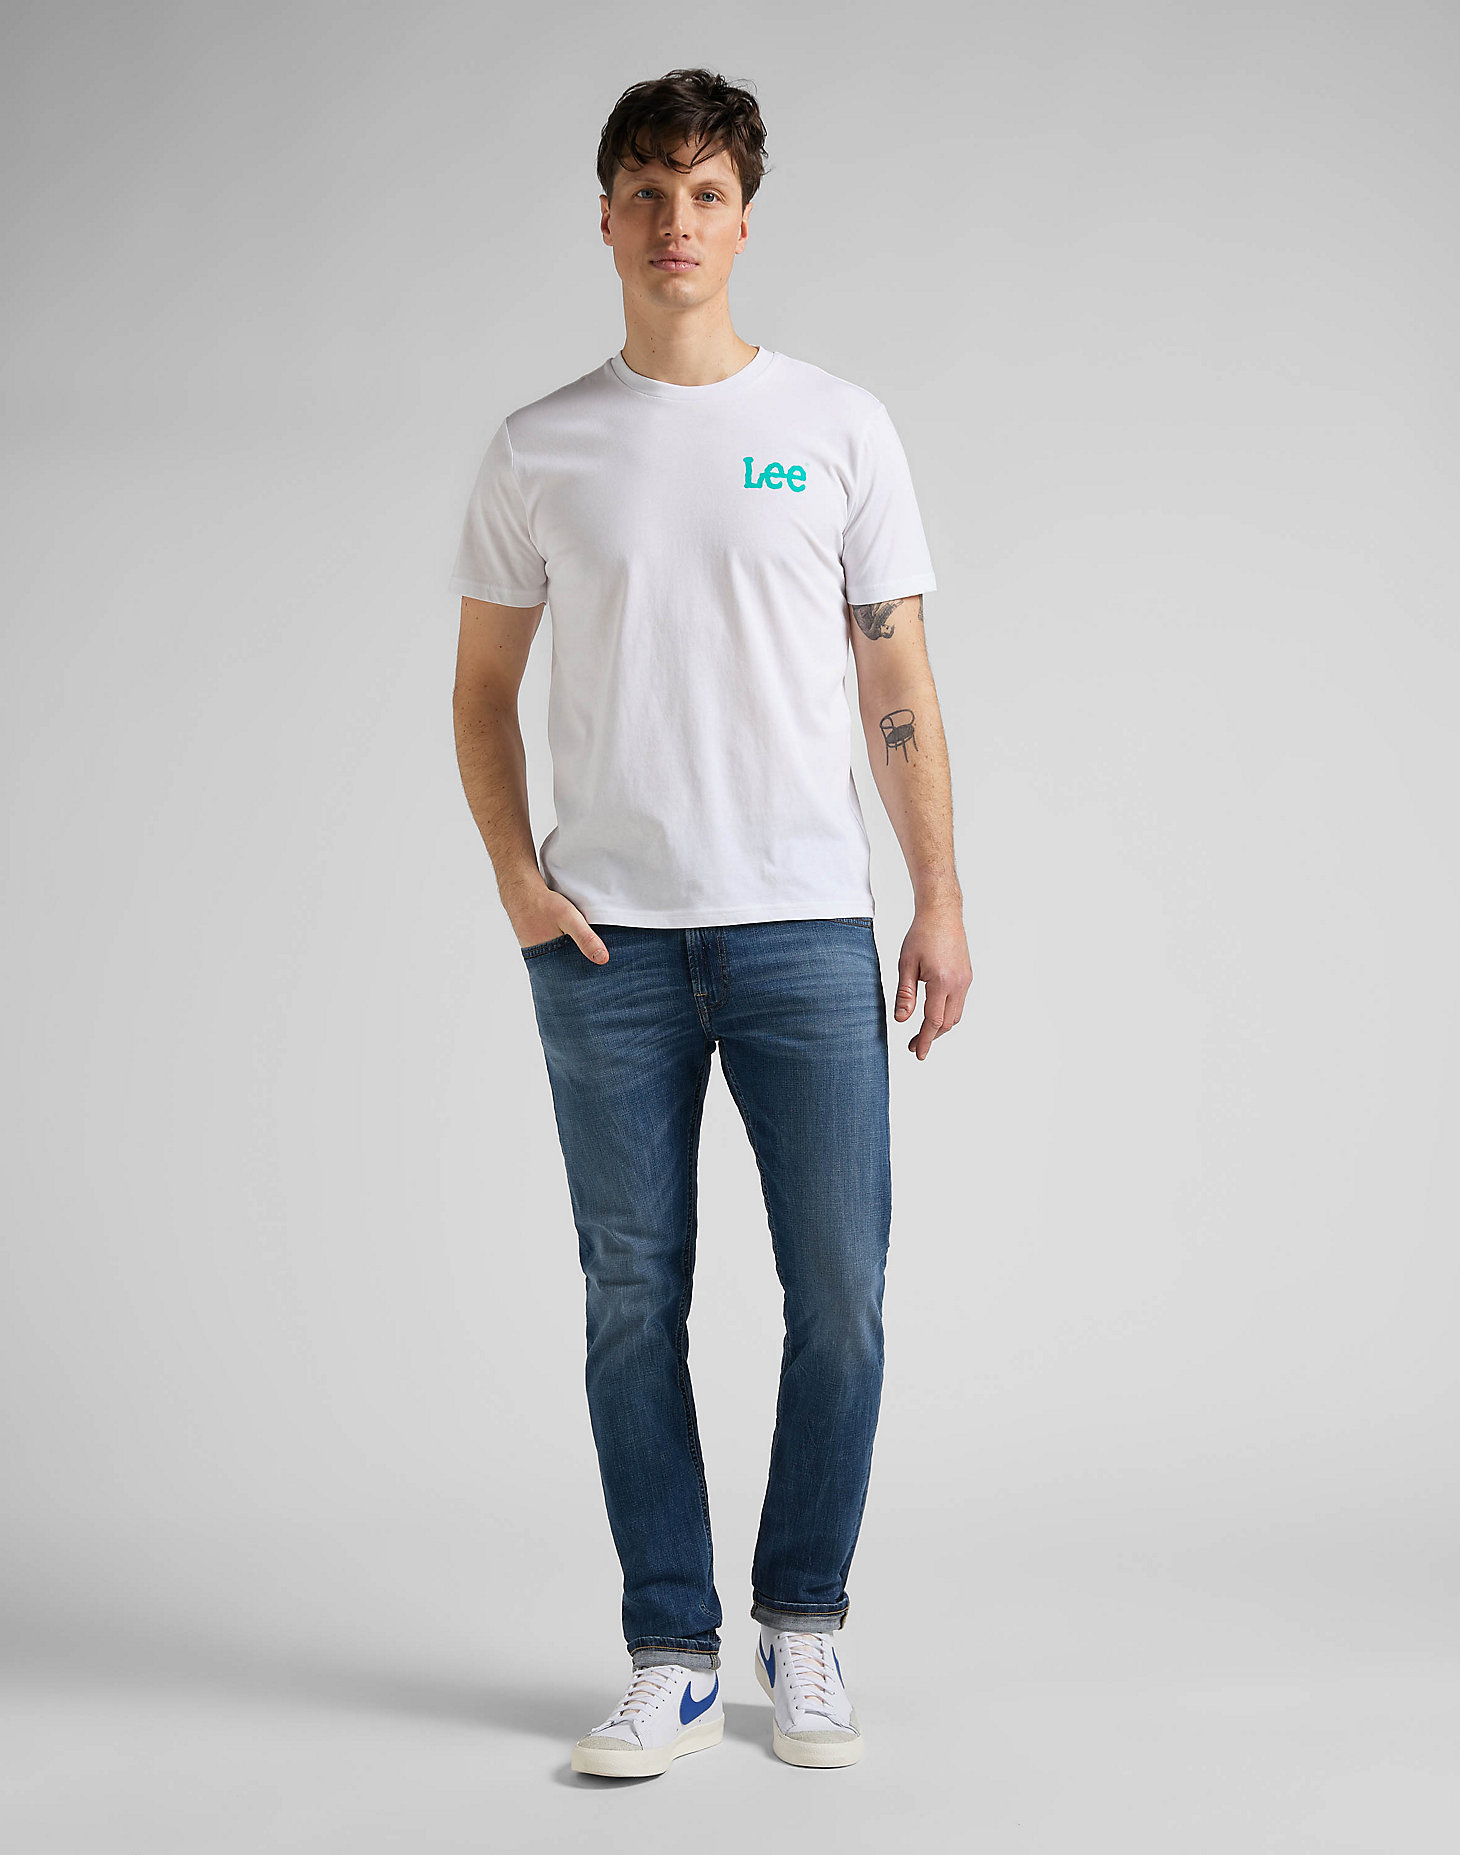 Wobbly Logo Tee in Bright White main view